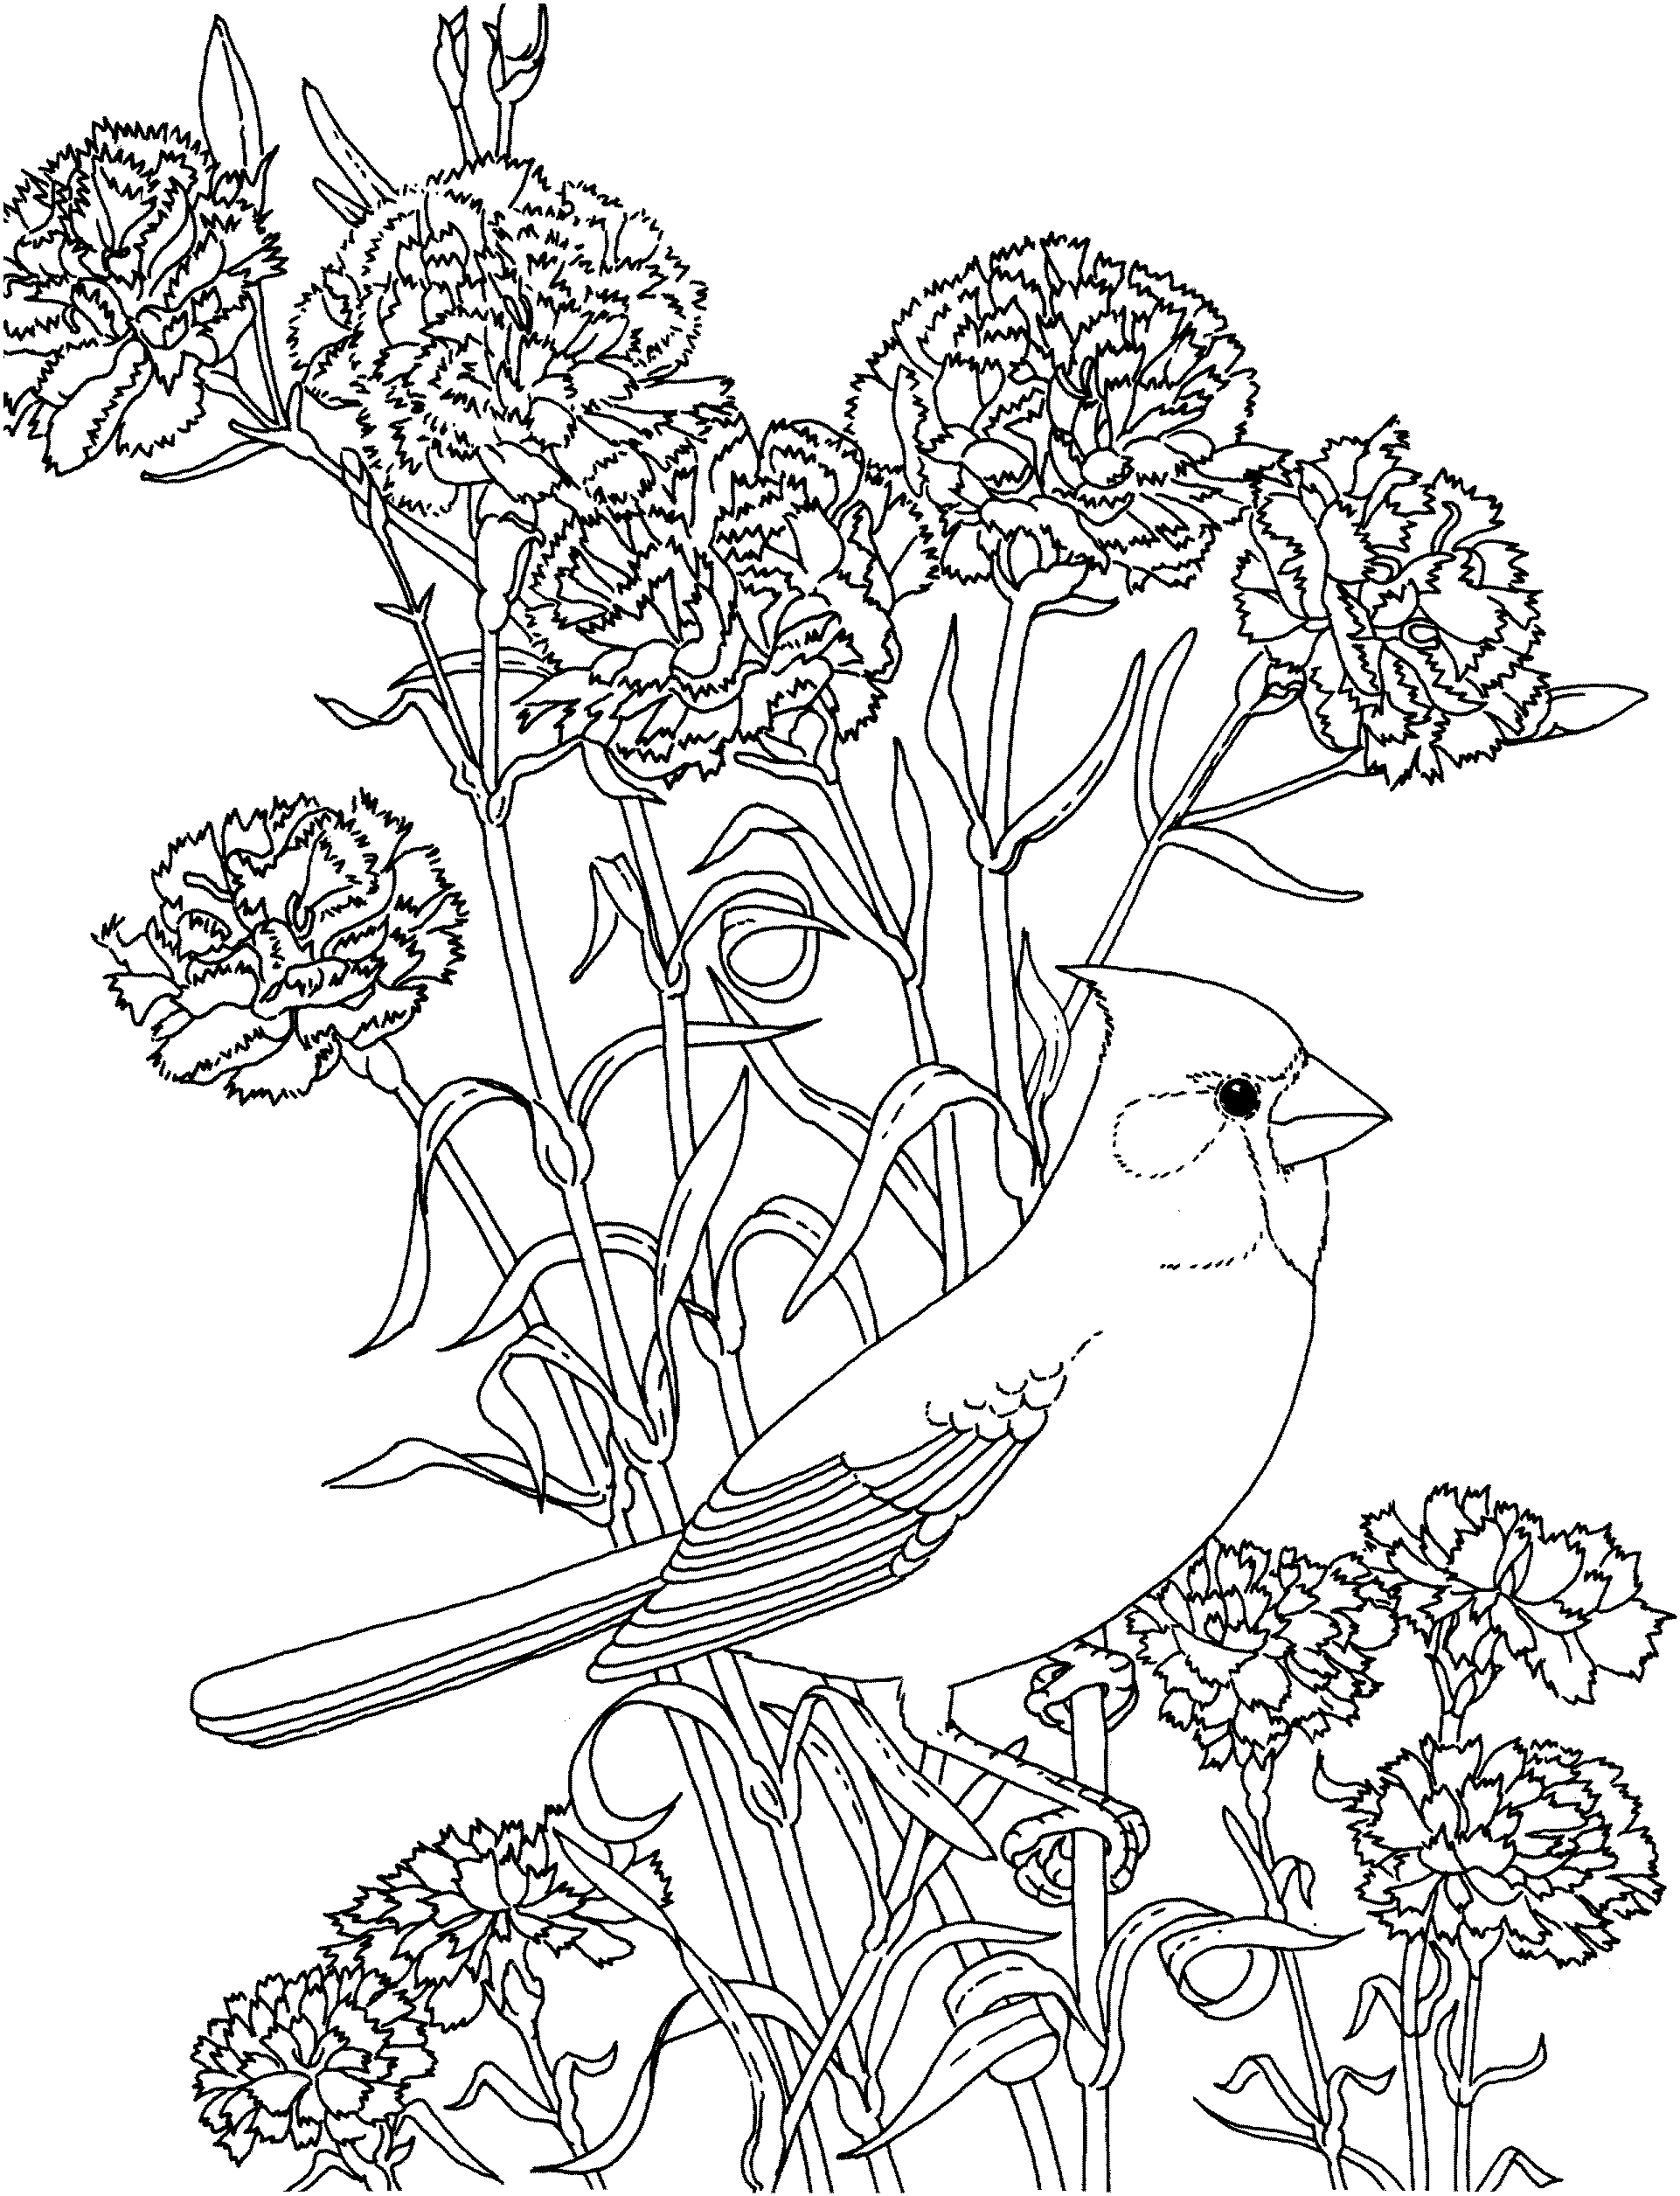 birdsandblooms coloring book birds and flowers spring coloring page favecraftscom book birdsandblooms coloring 